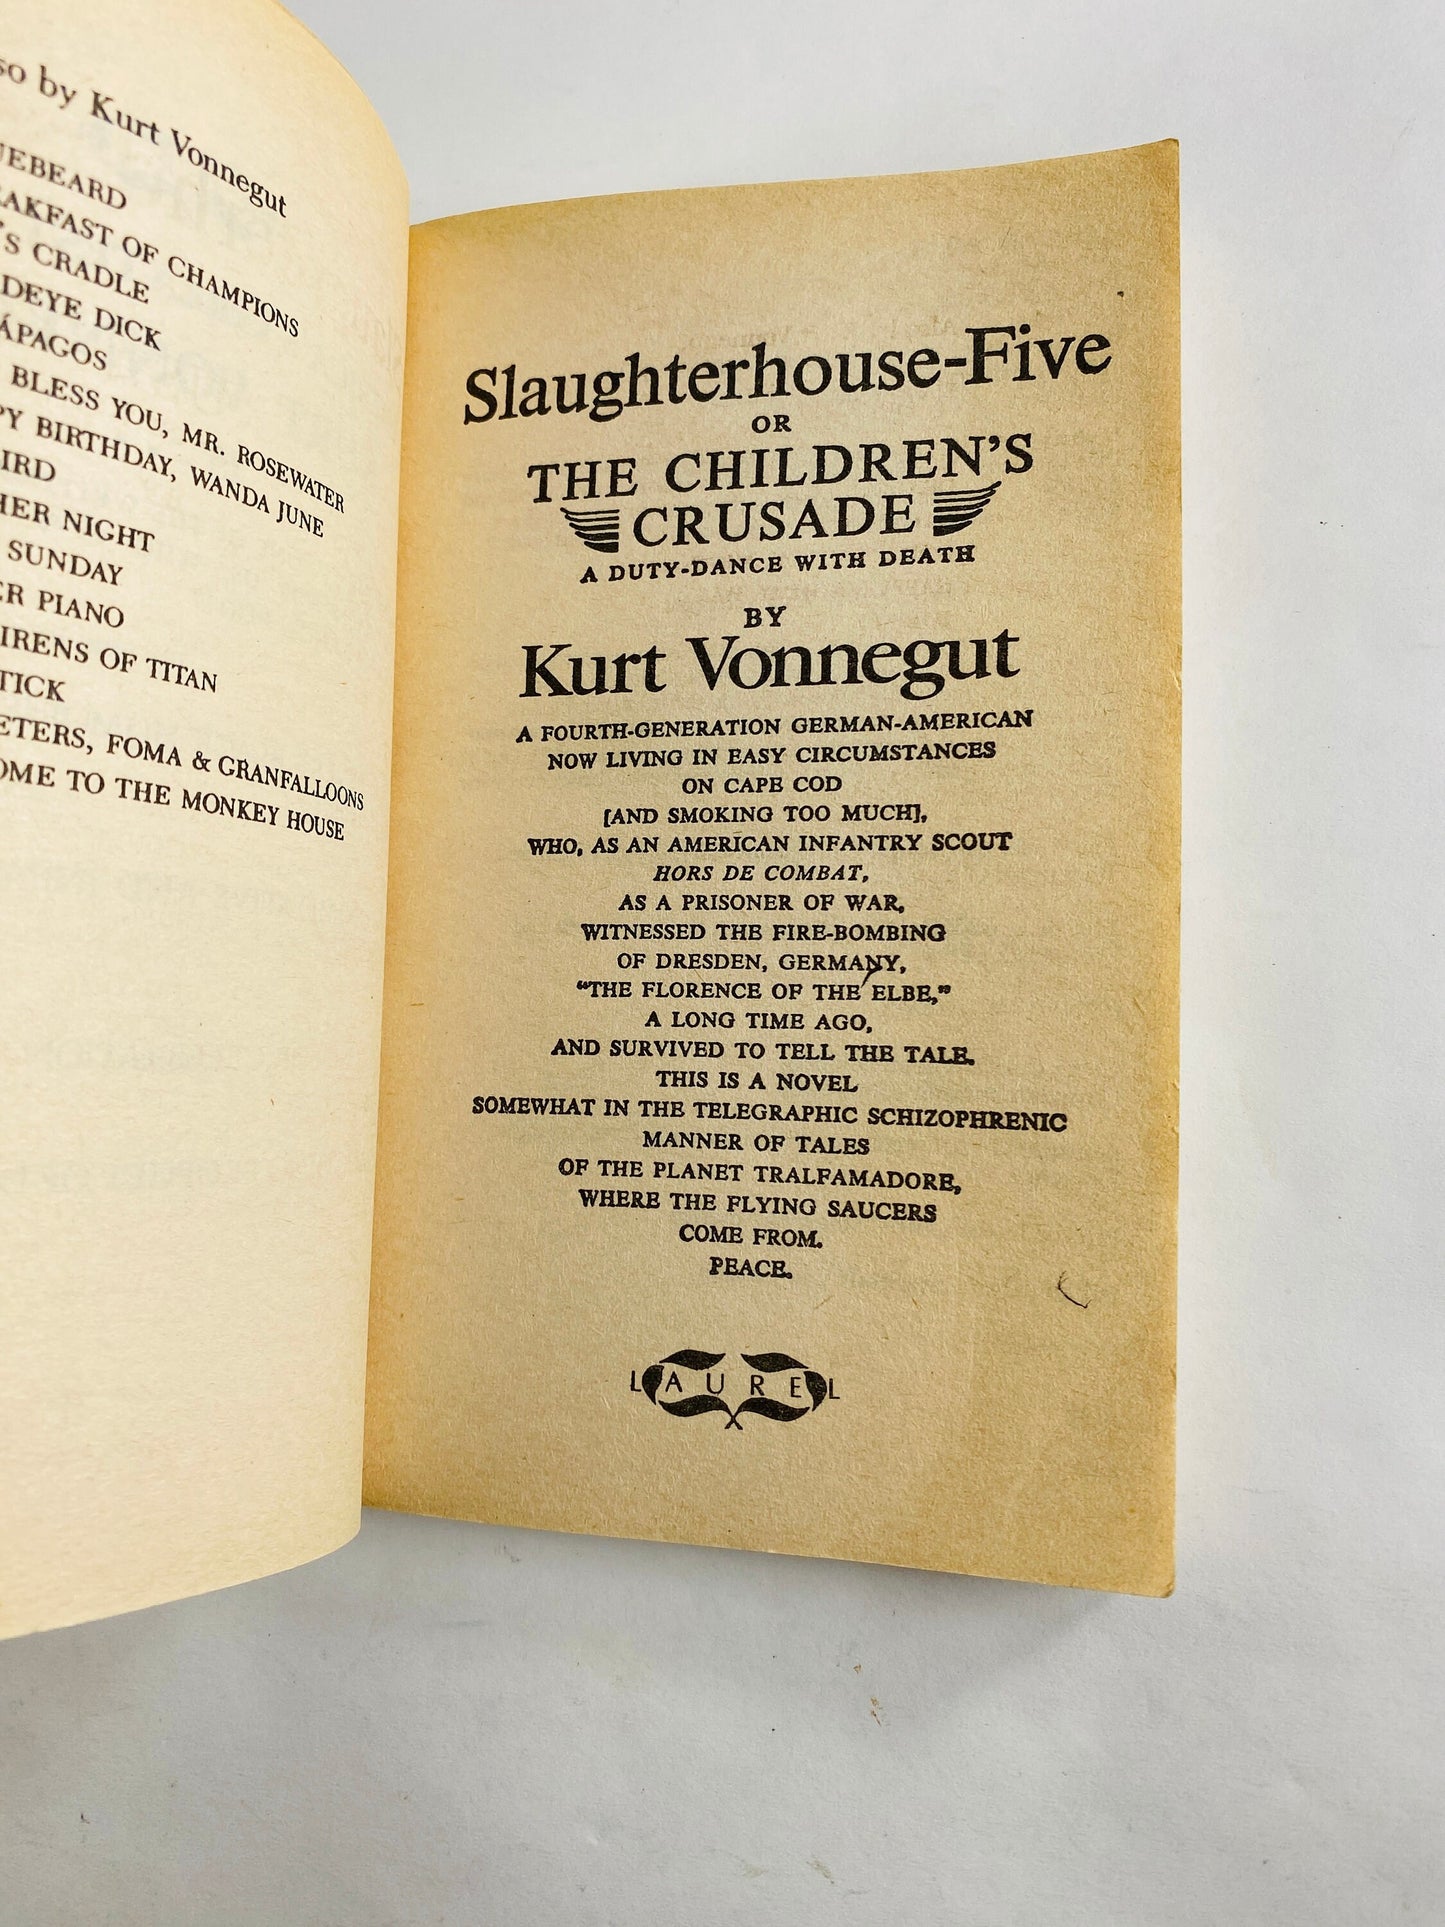 Kurt Vonnegut Slaughterhouse-Five vintage paperback book circa 1991 reminding us how to see the truth.